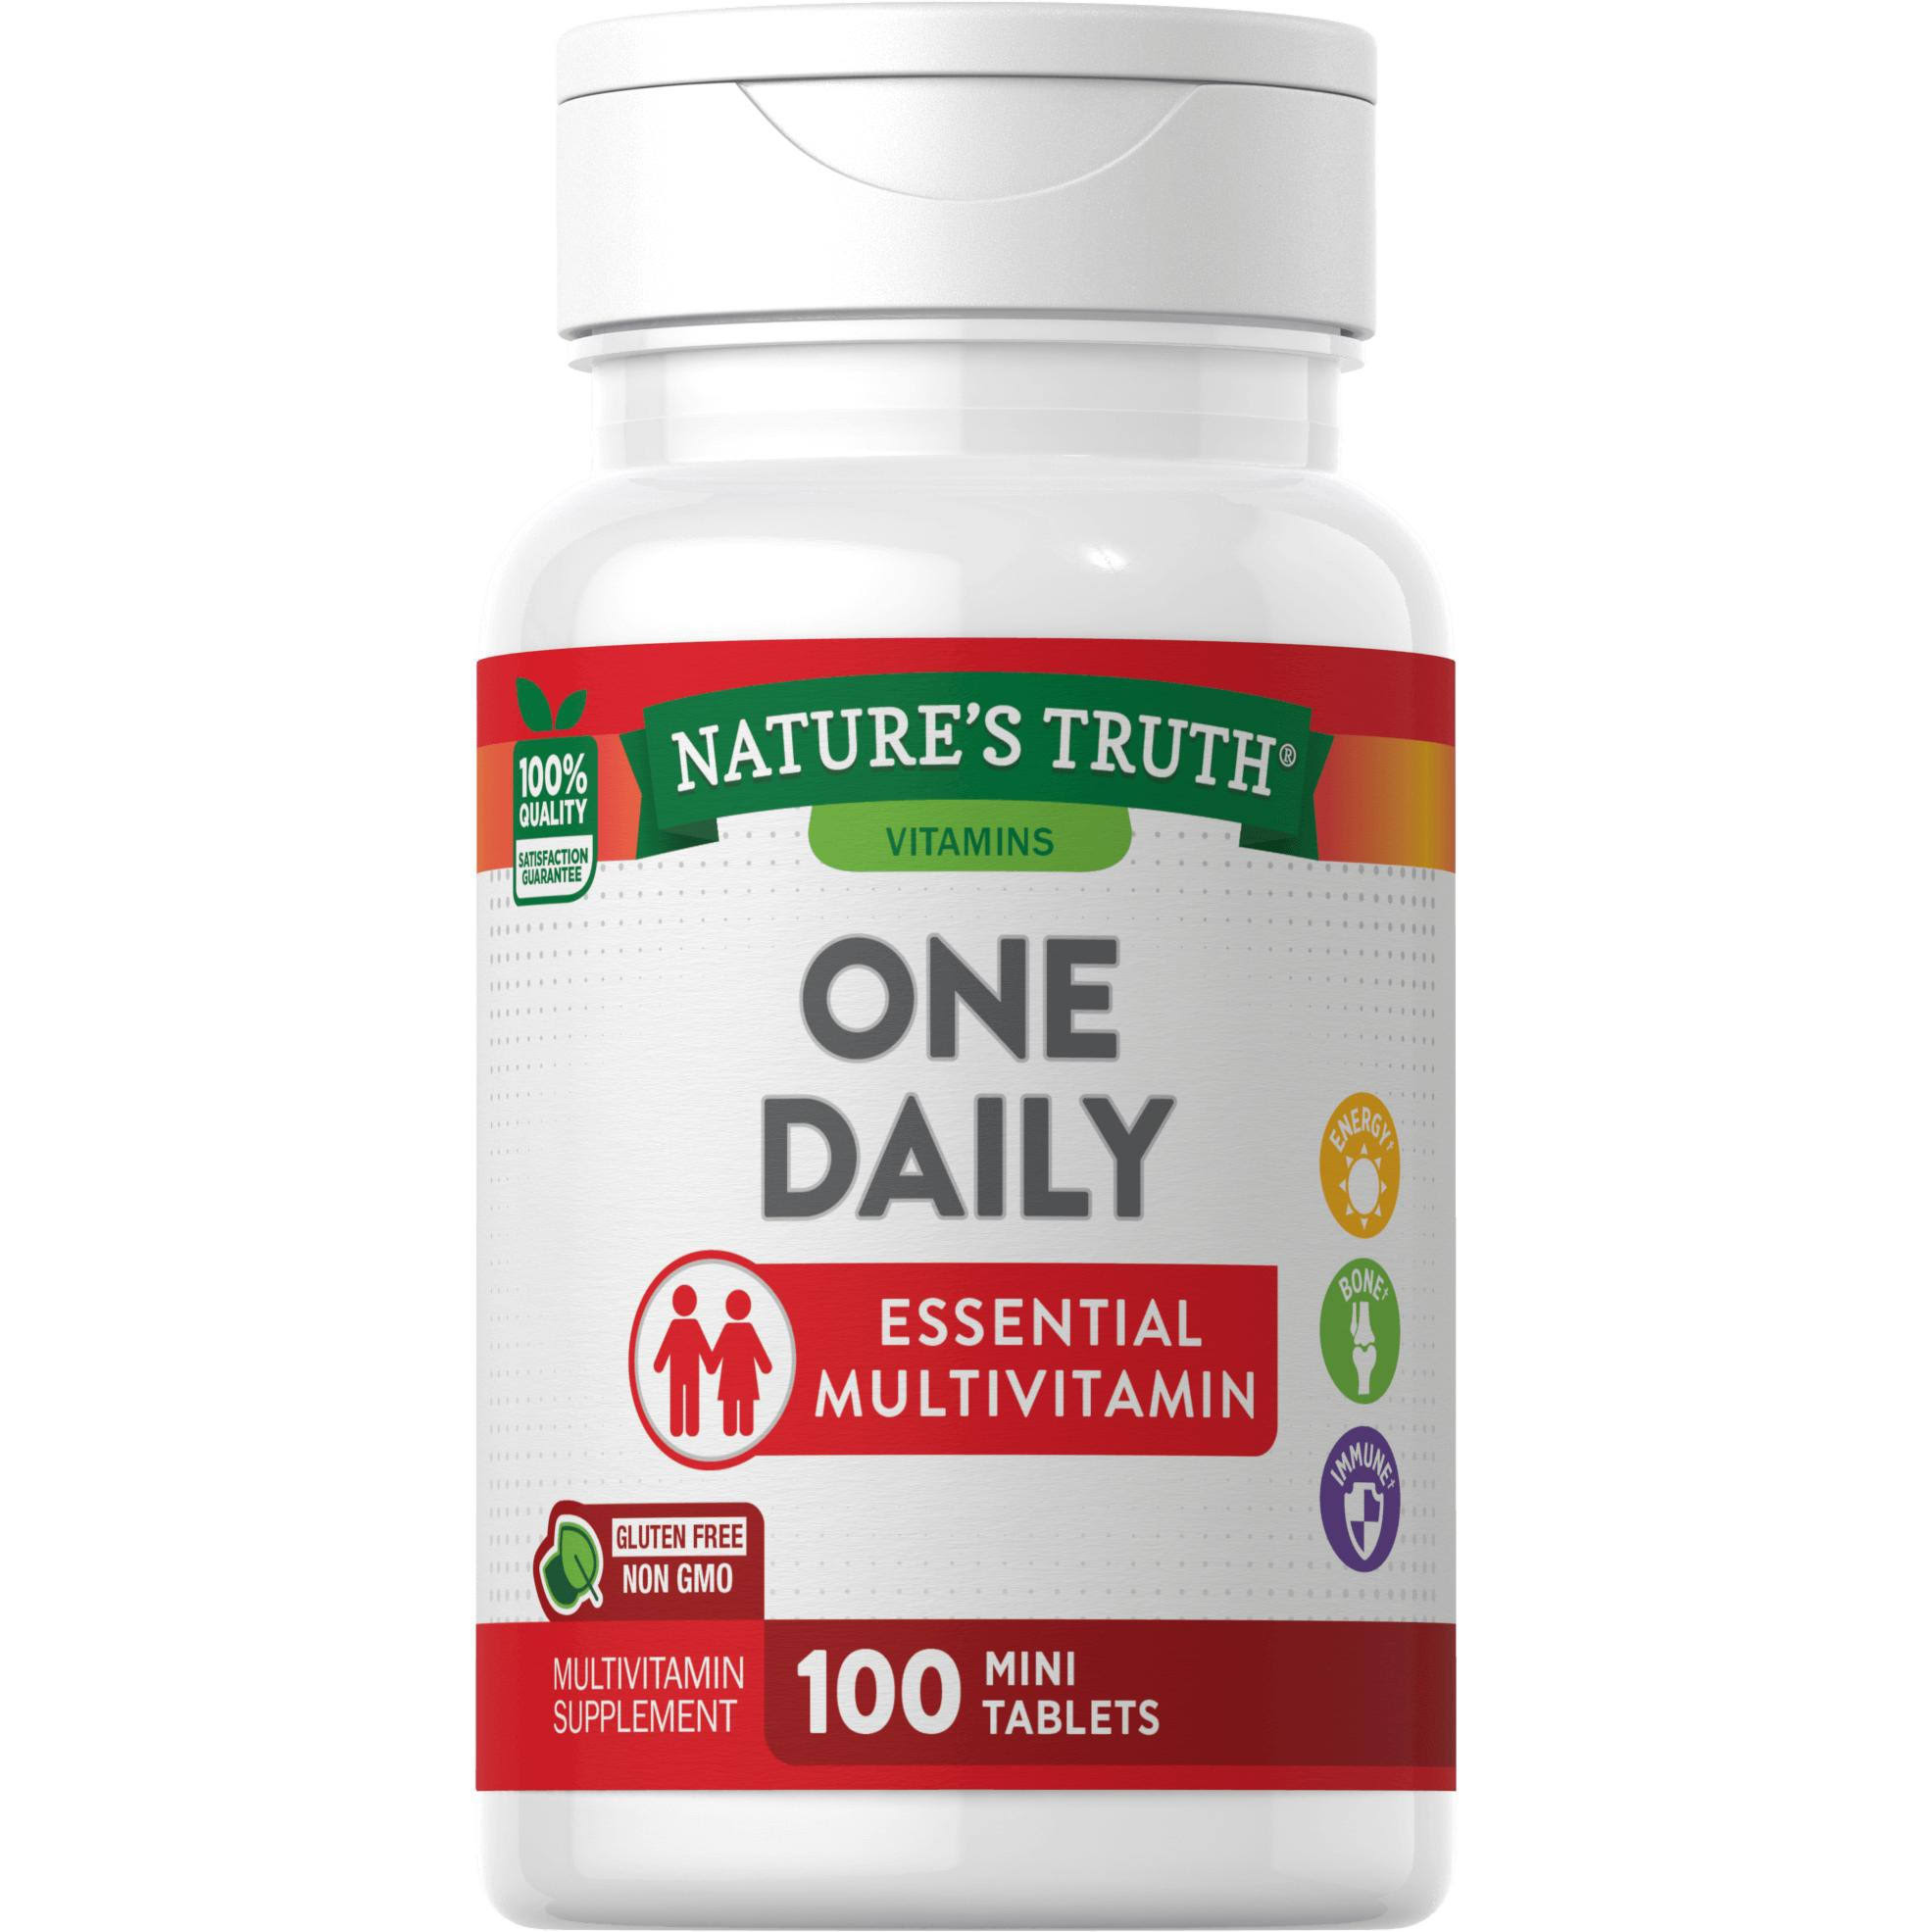 Nature's Truth One Daily Multivitamin Value Size 100 Count (2)